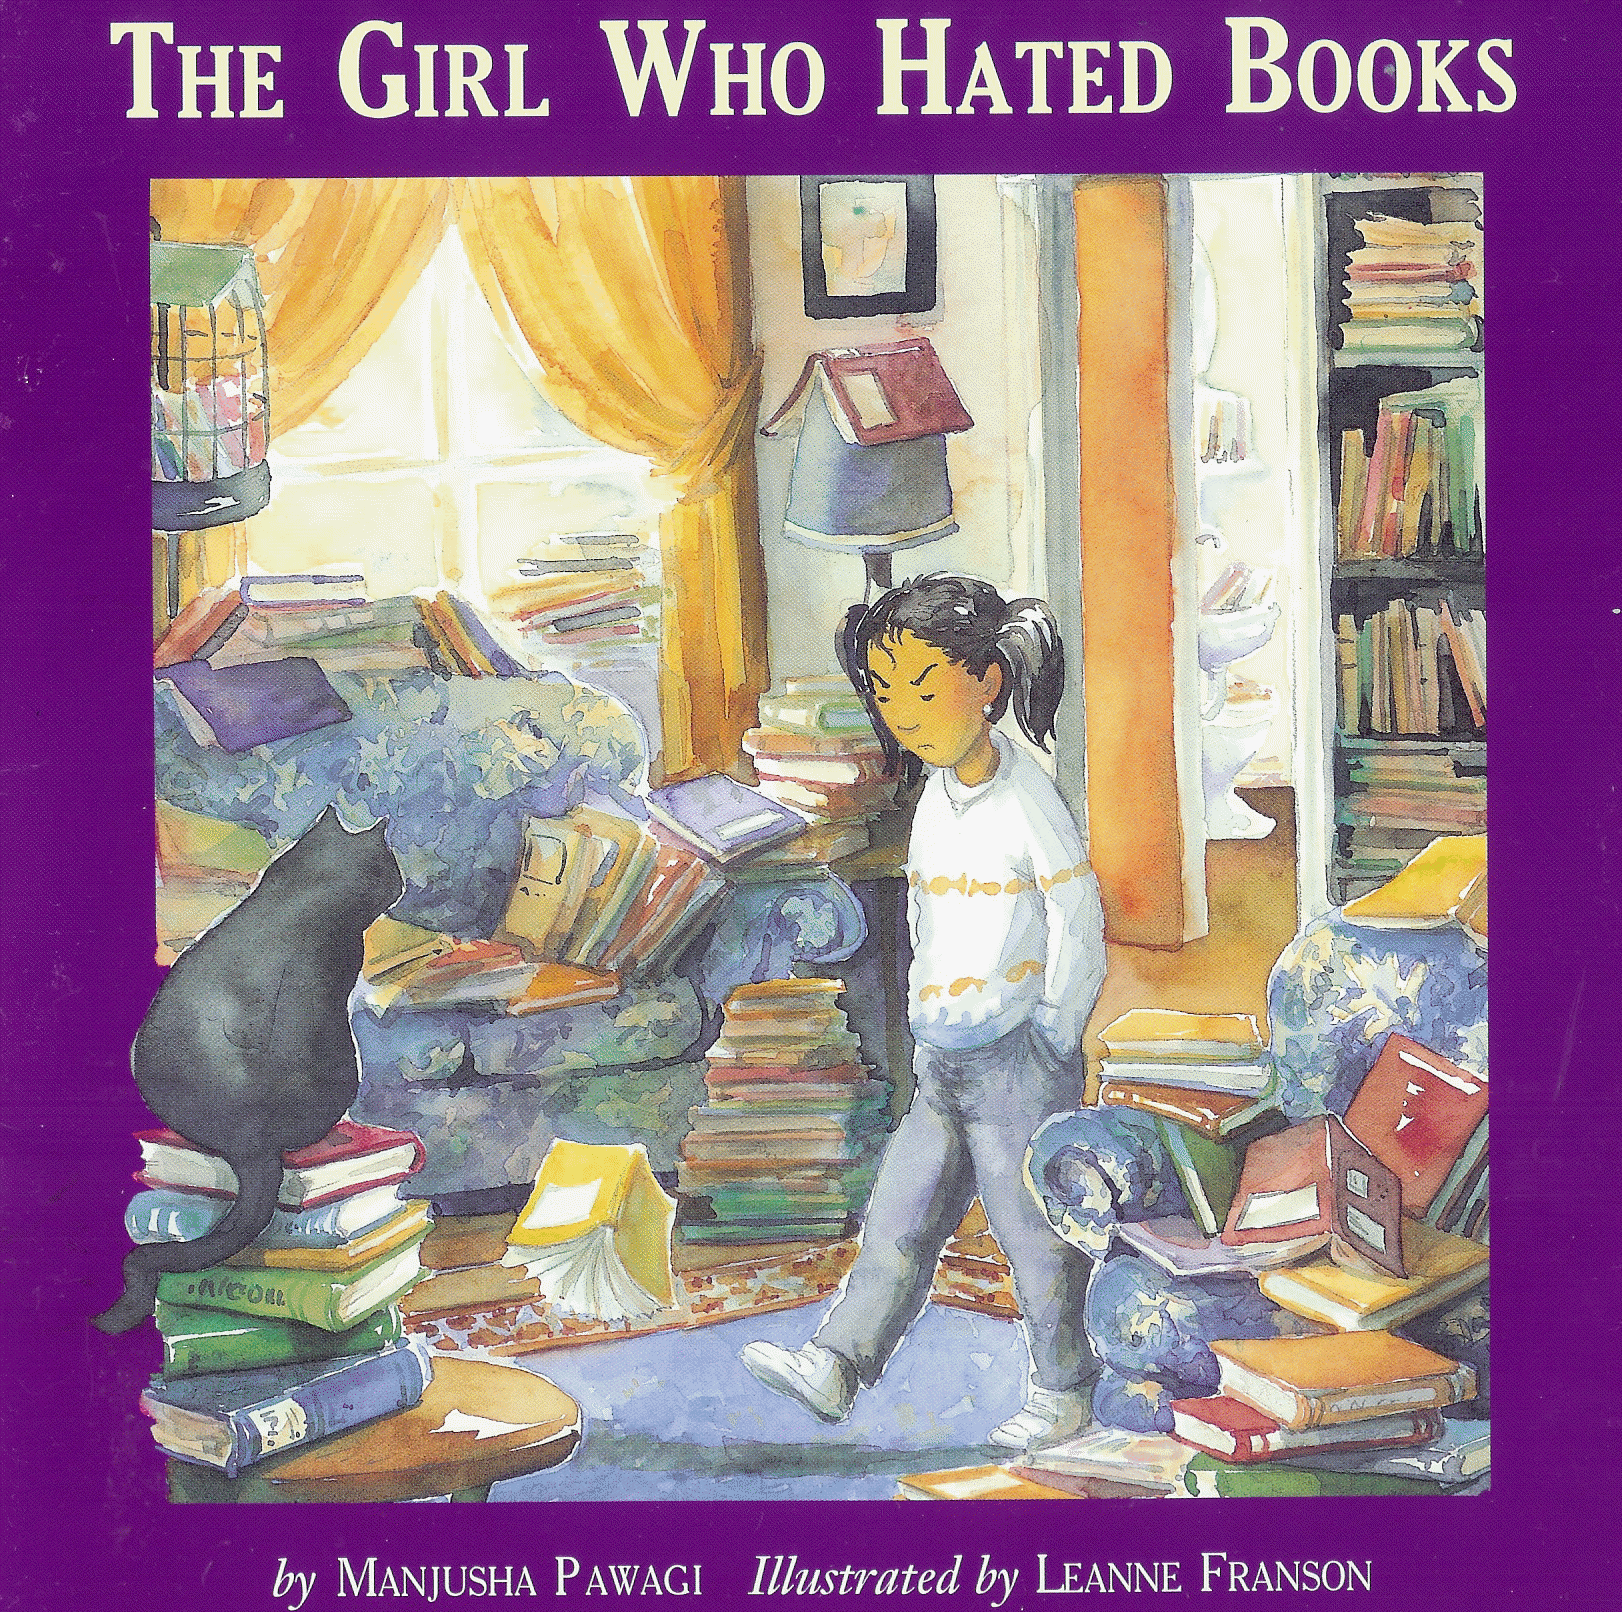 The girl who hated books